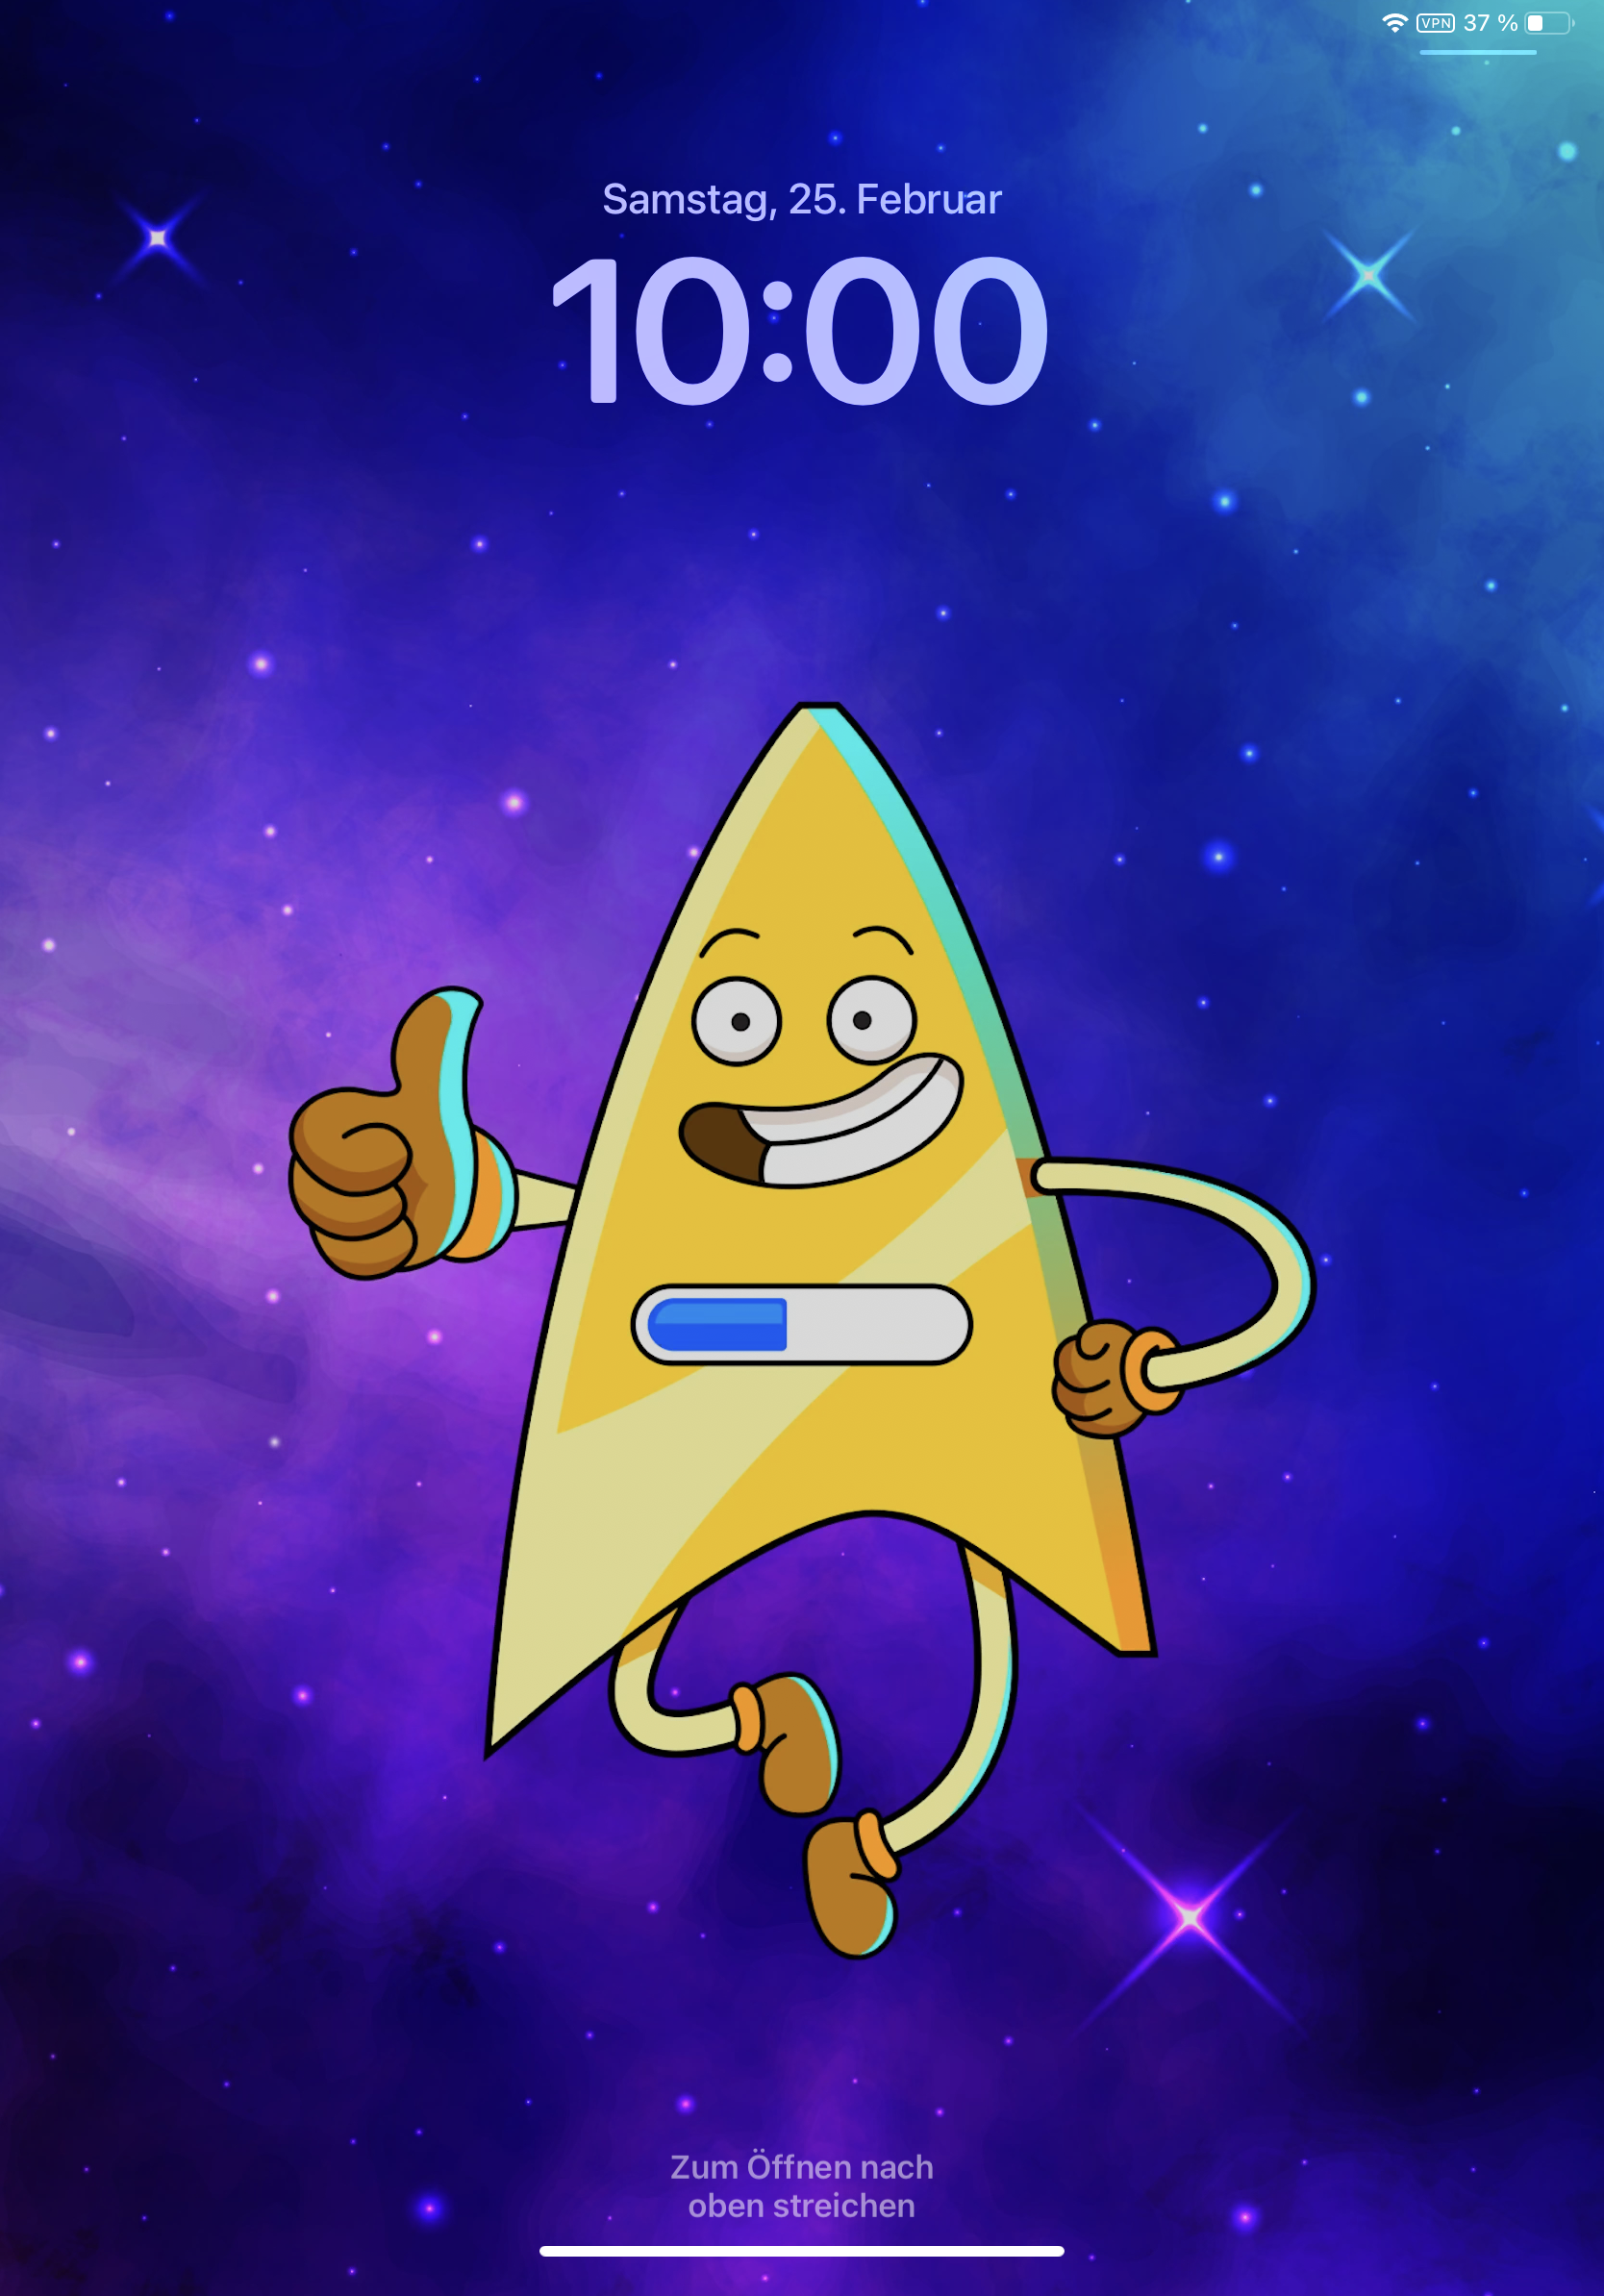 Screenshot of iPad wallpaper showing the holodeck character/construct Badgy, a stylised Starfleet (Star Trek) communicator badge with arms, legs, and a face.